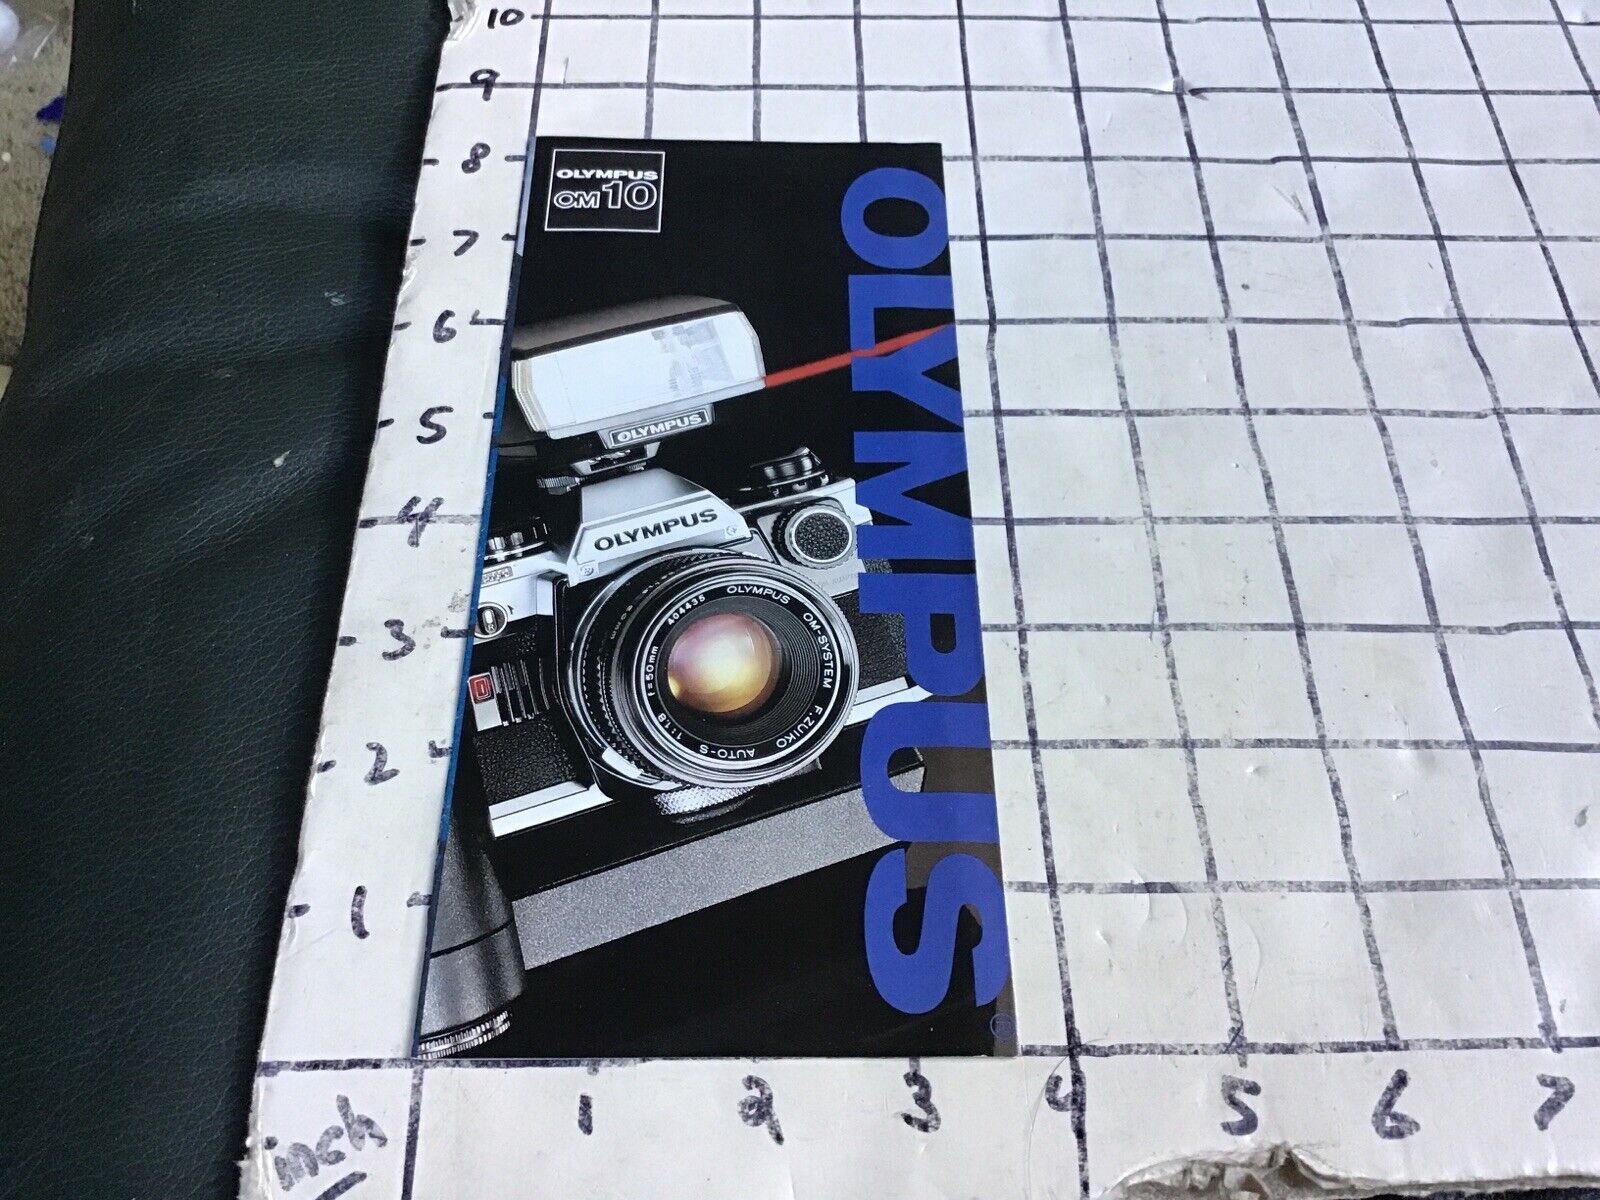 Original Vintage Brochure: OLYMPUS OM 10 -- i show all pages - circa 1980\'s